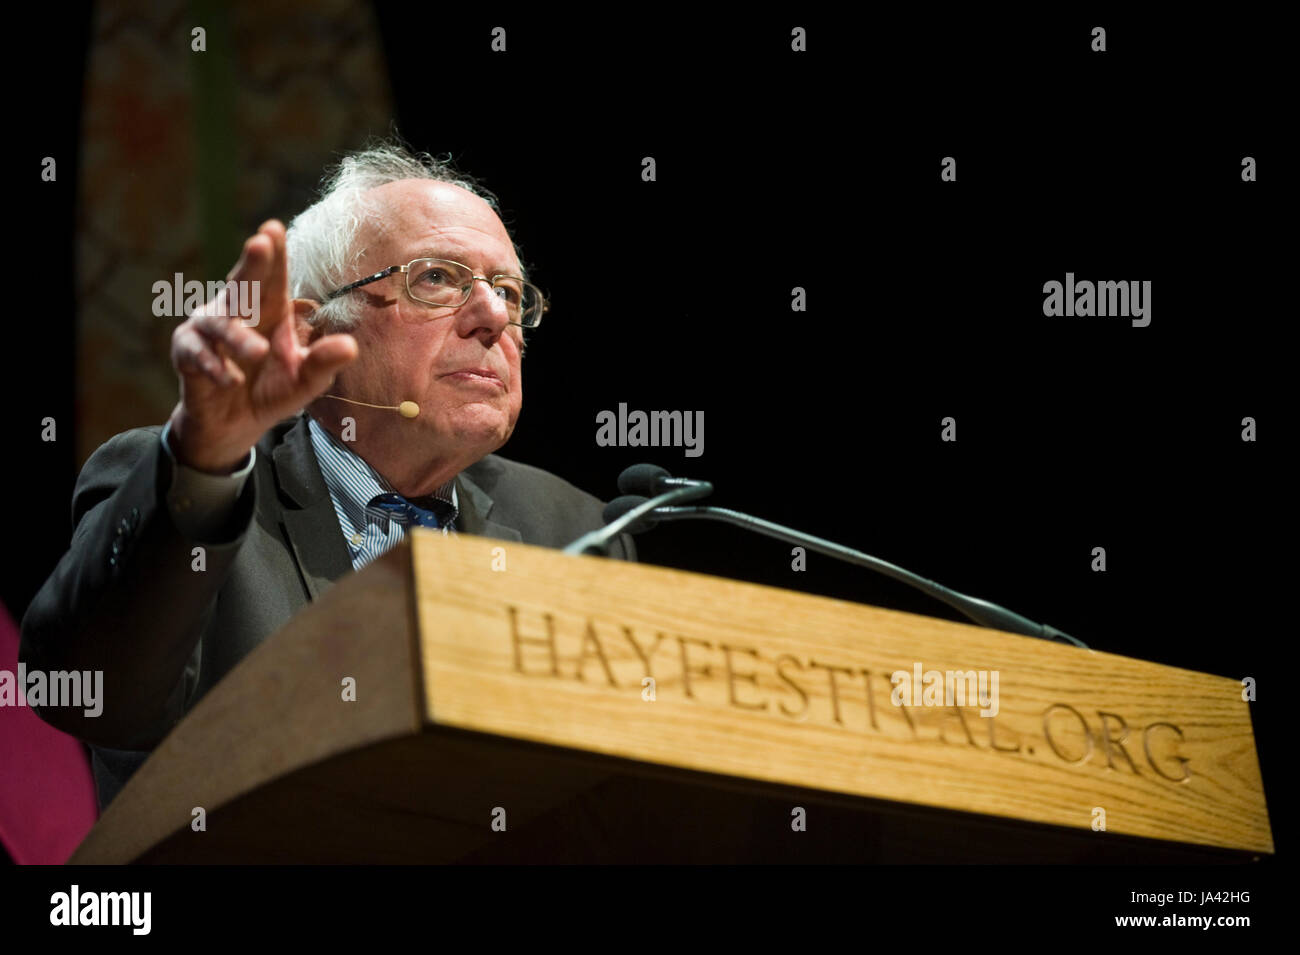 US Senator Bernie Sanders giving the 2017 Eric Hobsbawm Lecture at Hay Festival Hay-on-Wye Powys Wales UK Stock Photo